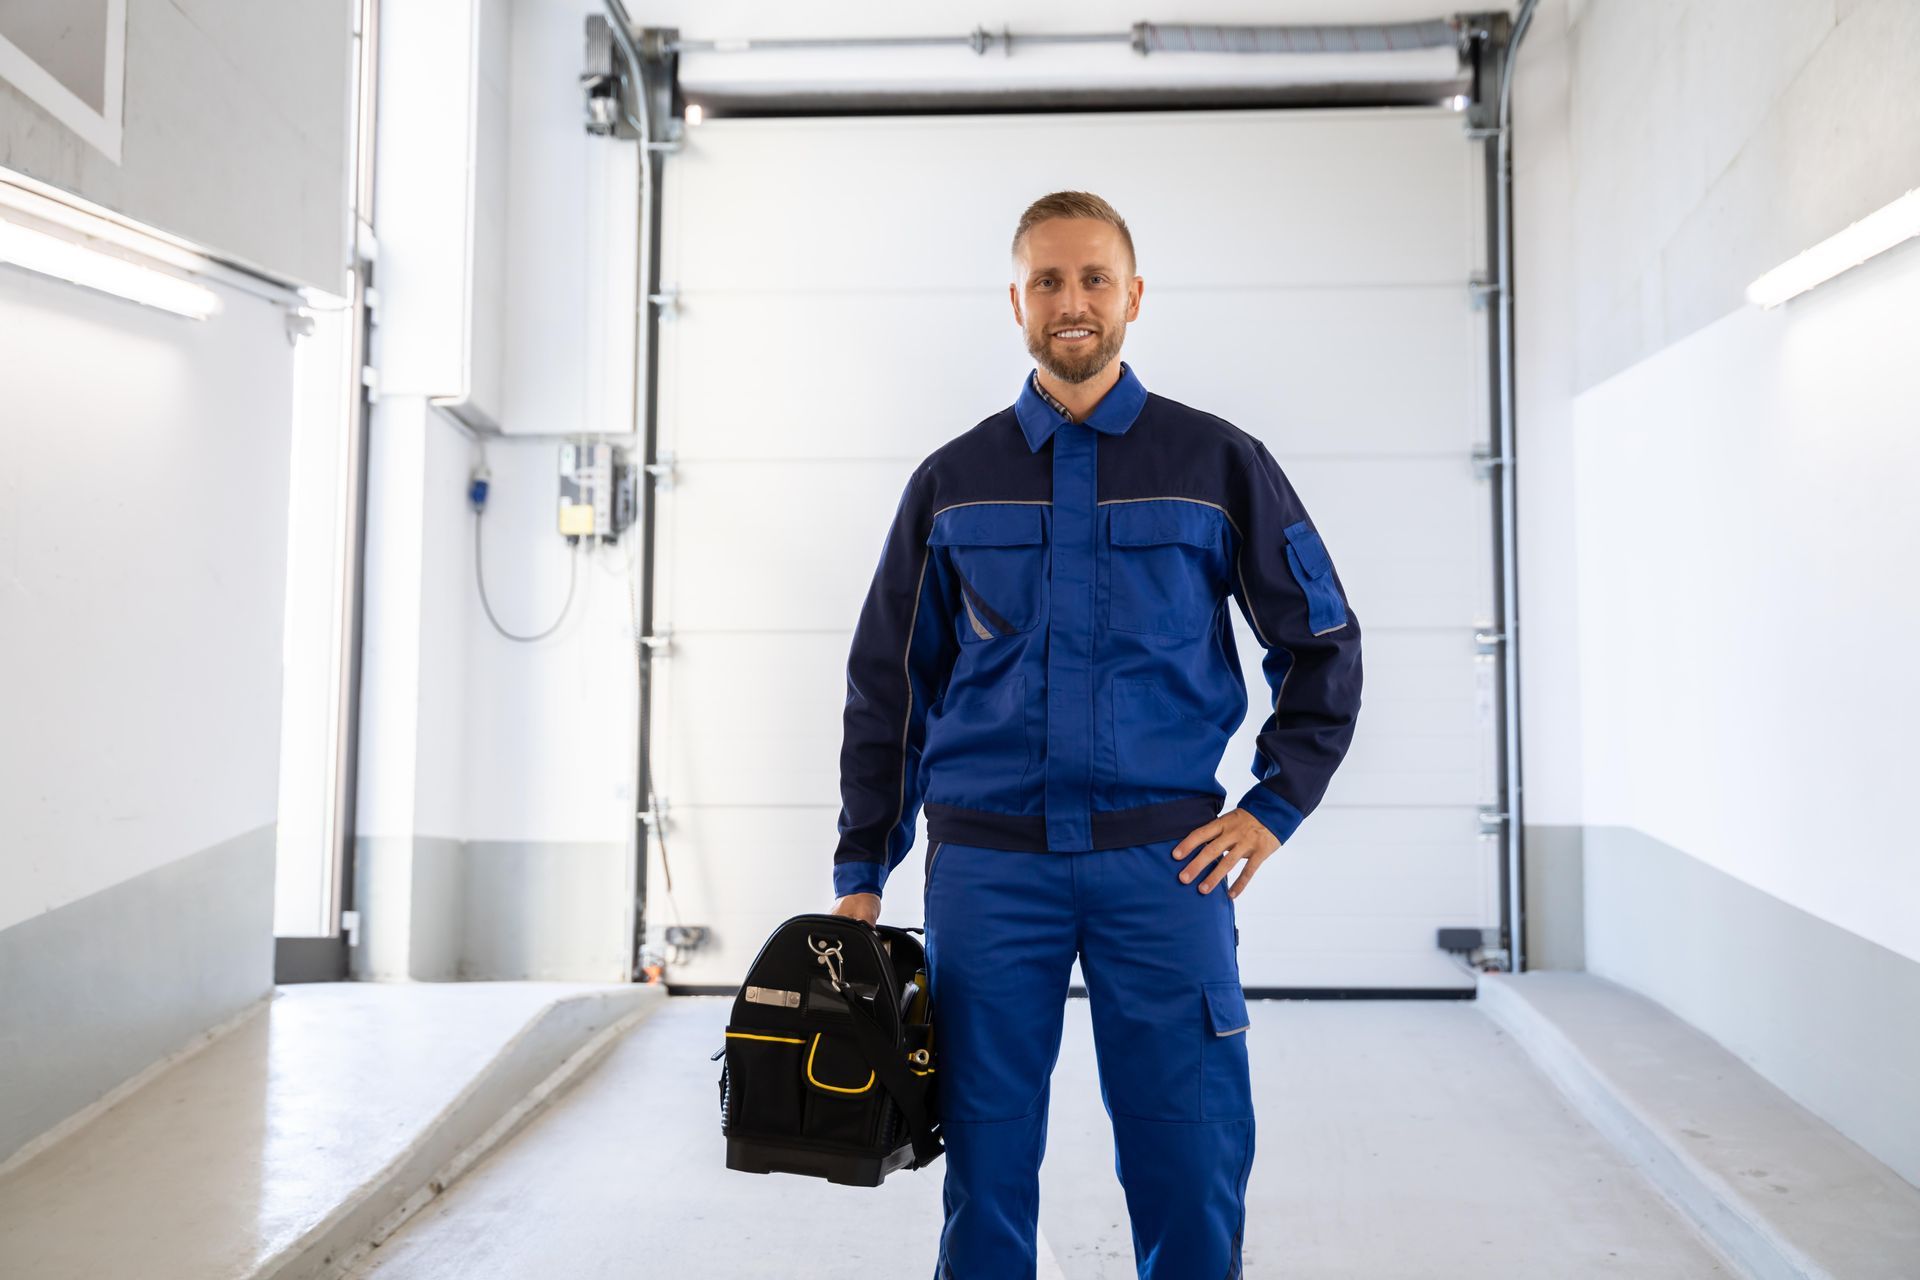 A man in a blue uniform is standing in front of a garage door holding a tool bag.